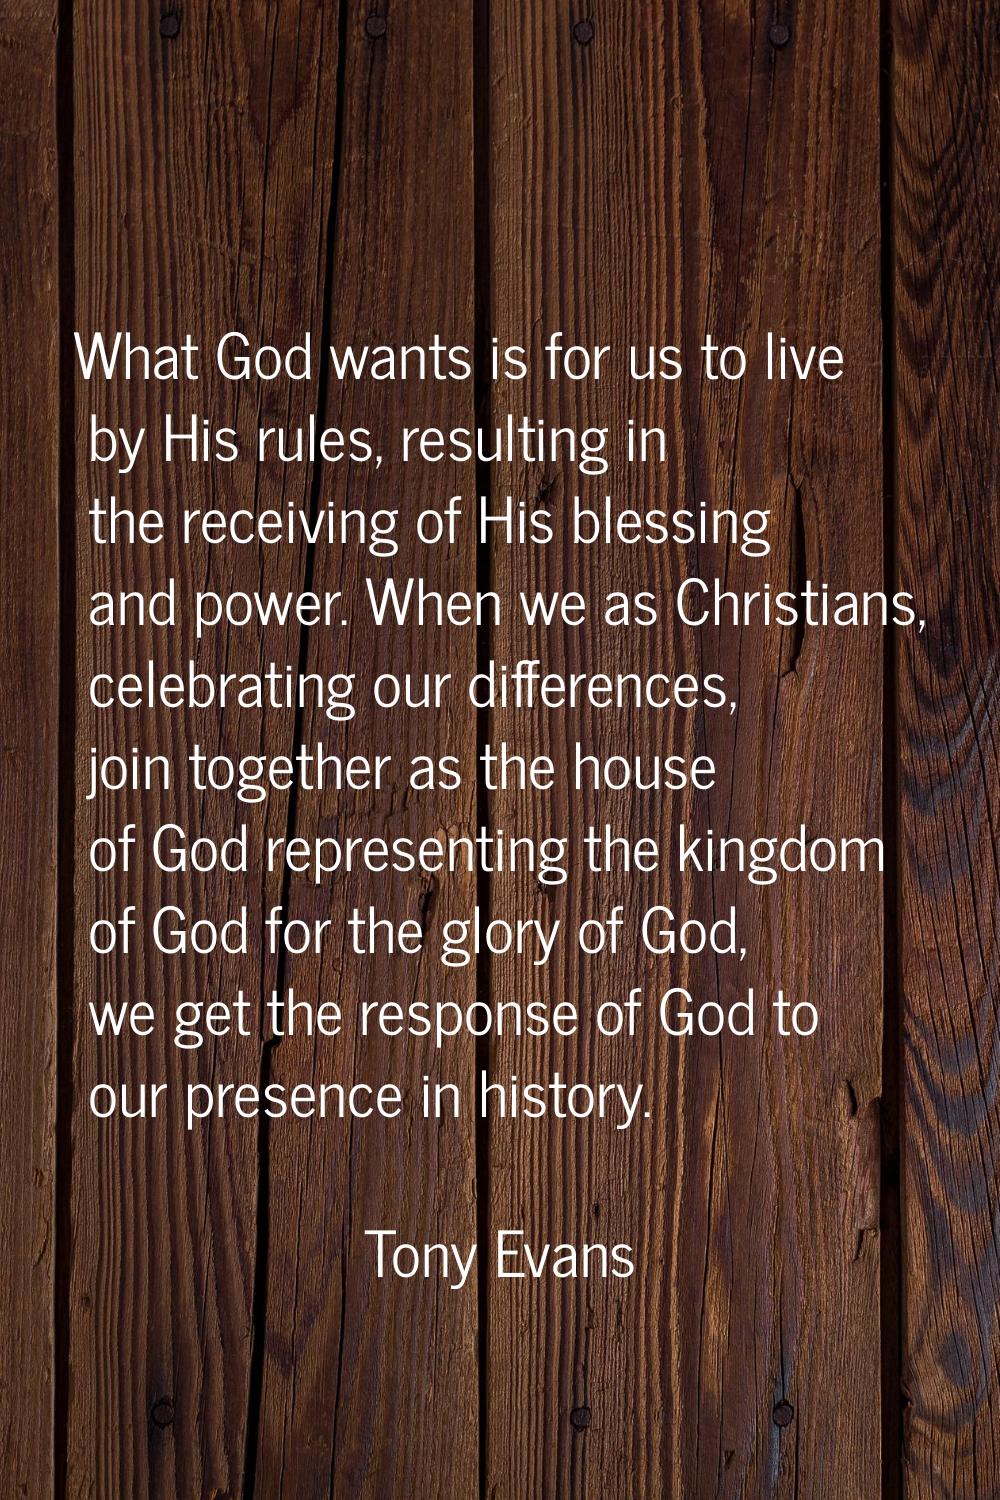 What God wants is for us to live by His rules, resulting in the receiving of His blessing and power